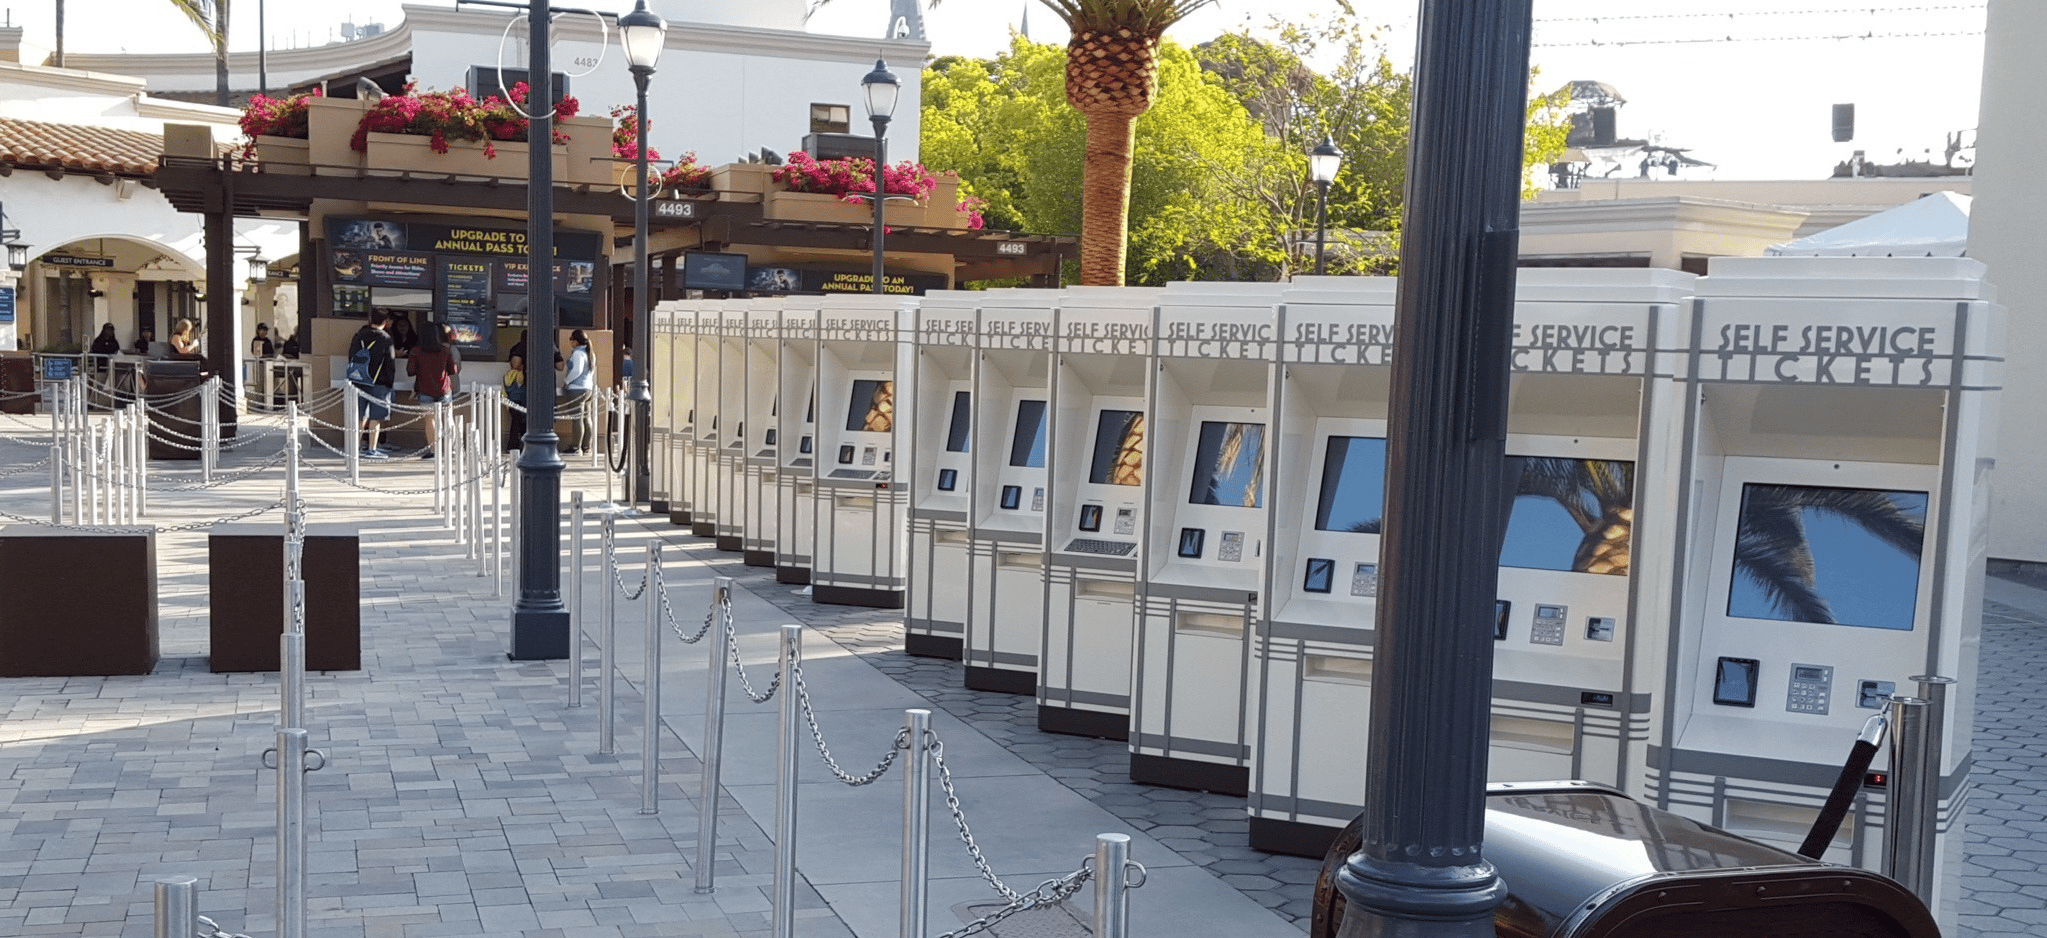 Self Service Tickets at Universal Pictures